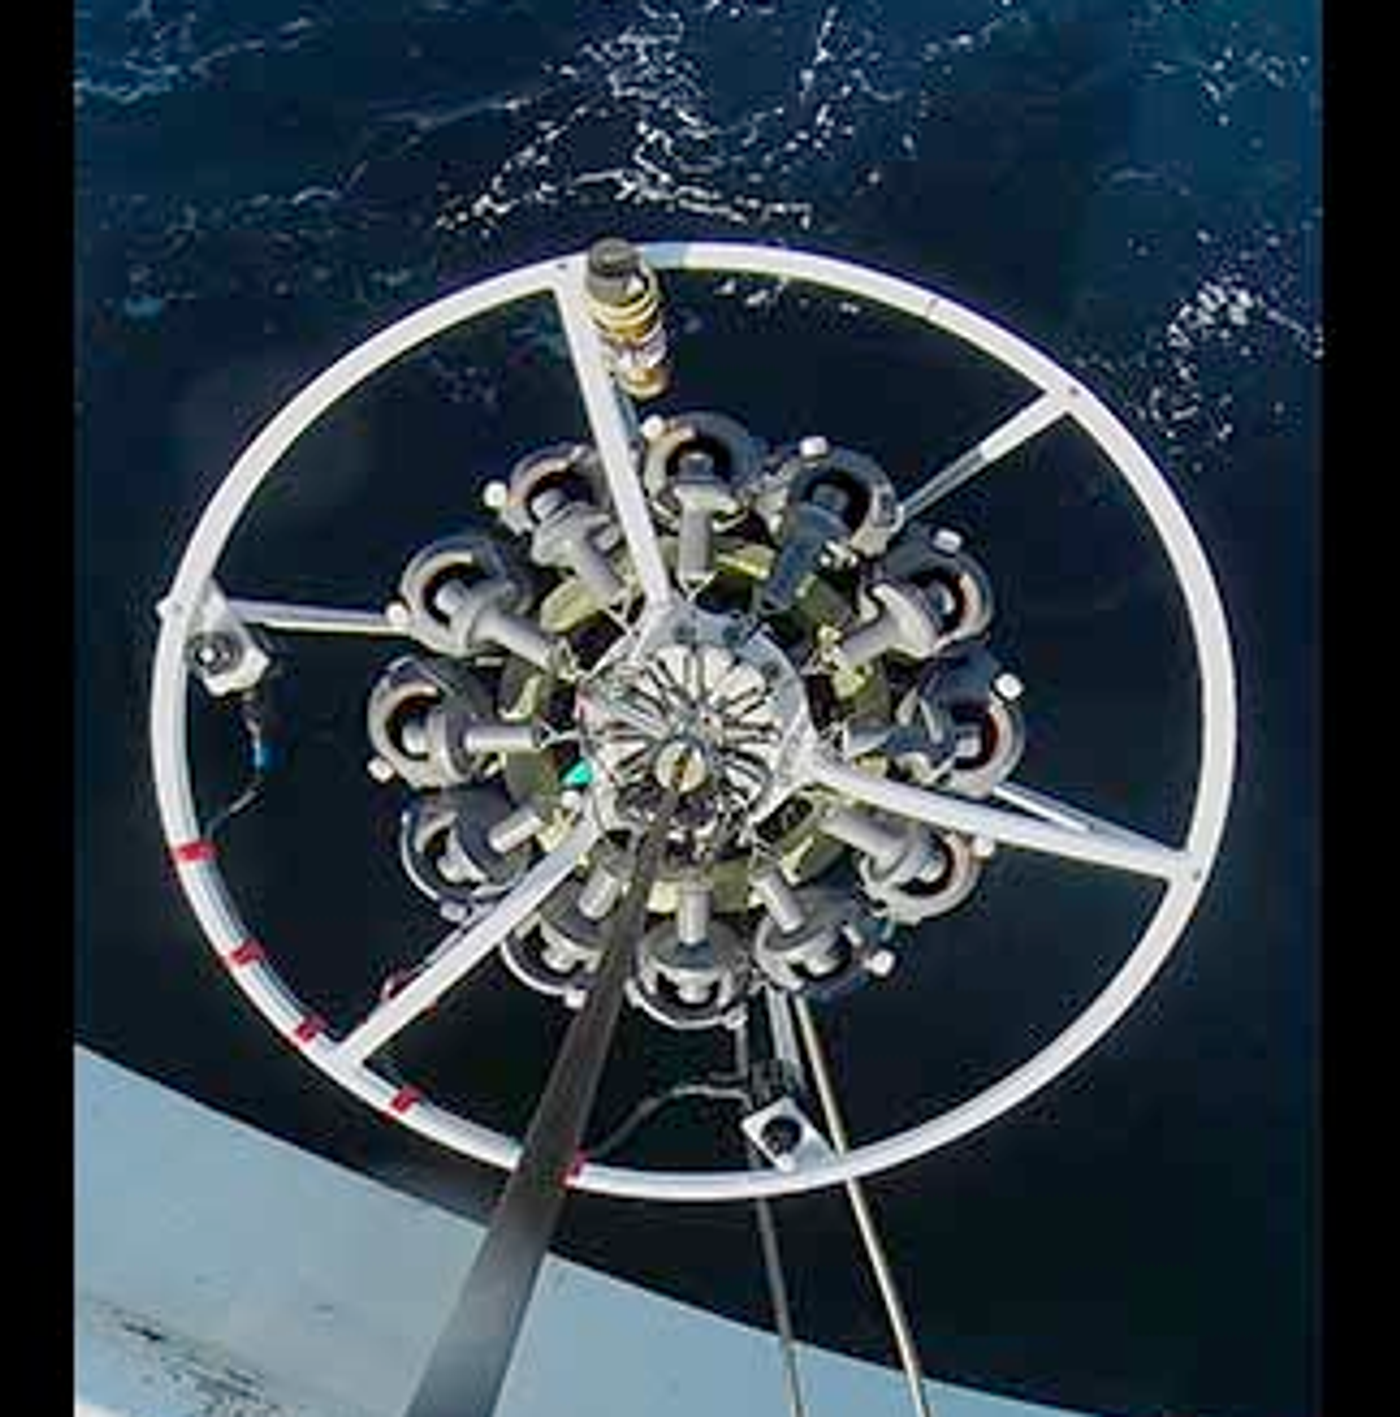 Researchers send this device deep into the ocean to collect samples of ocean water and look for microbes. / Credit: UBC